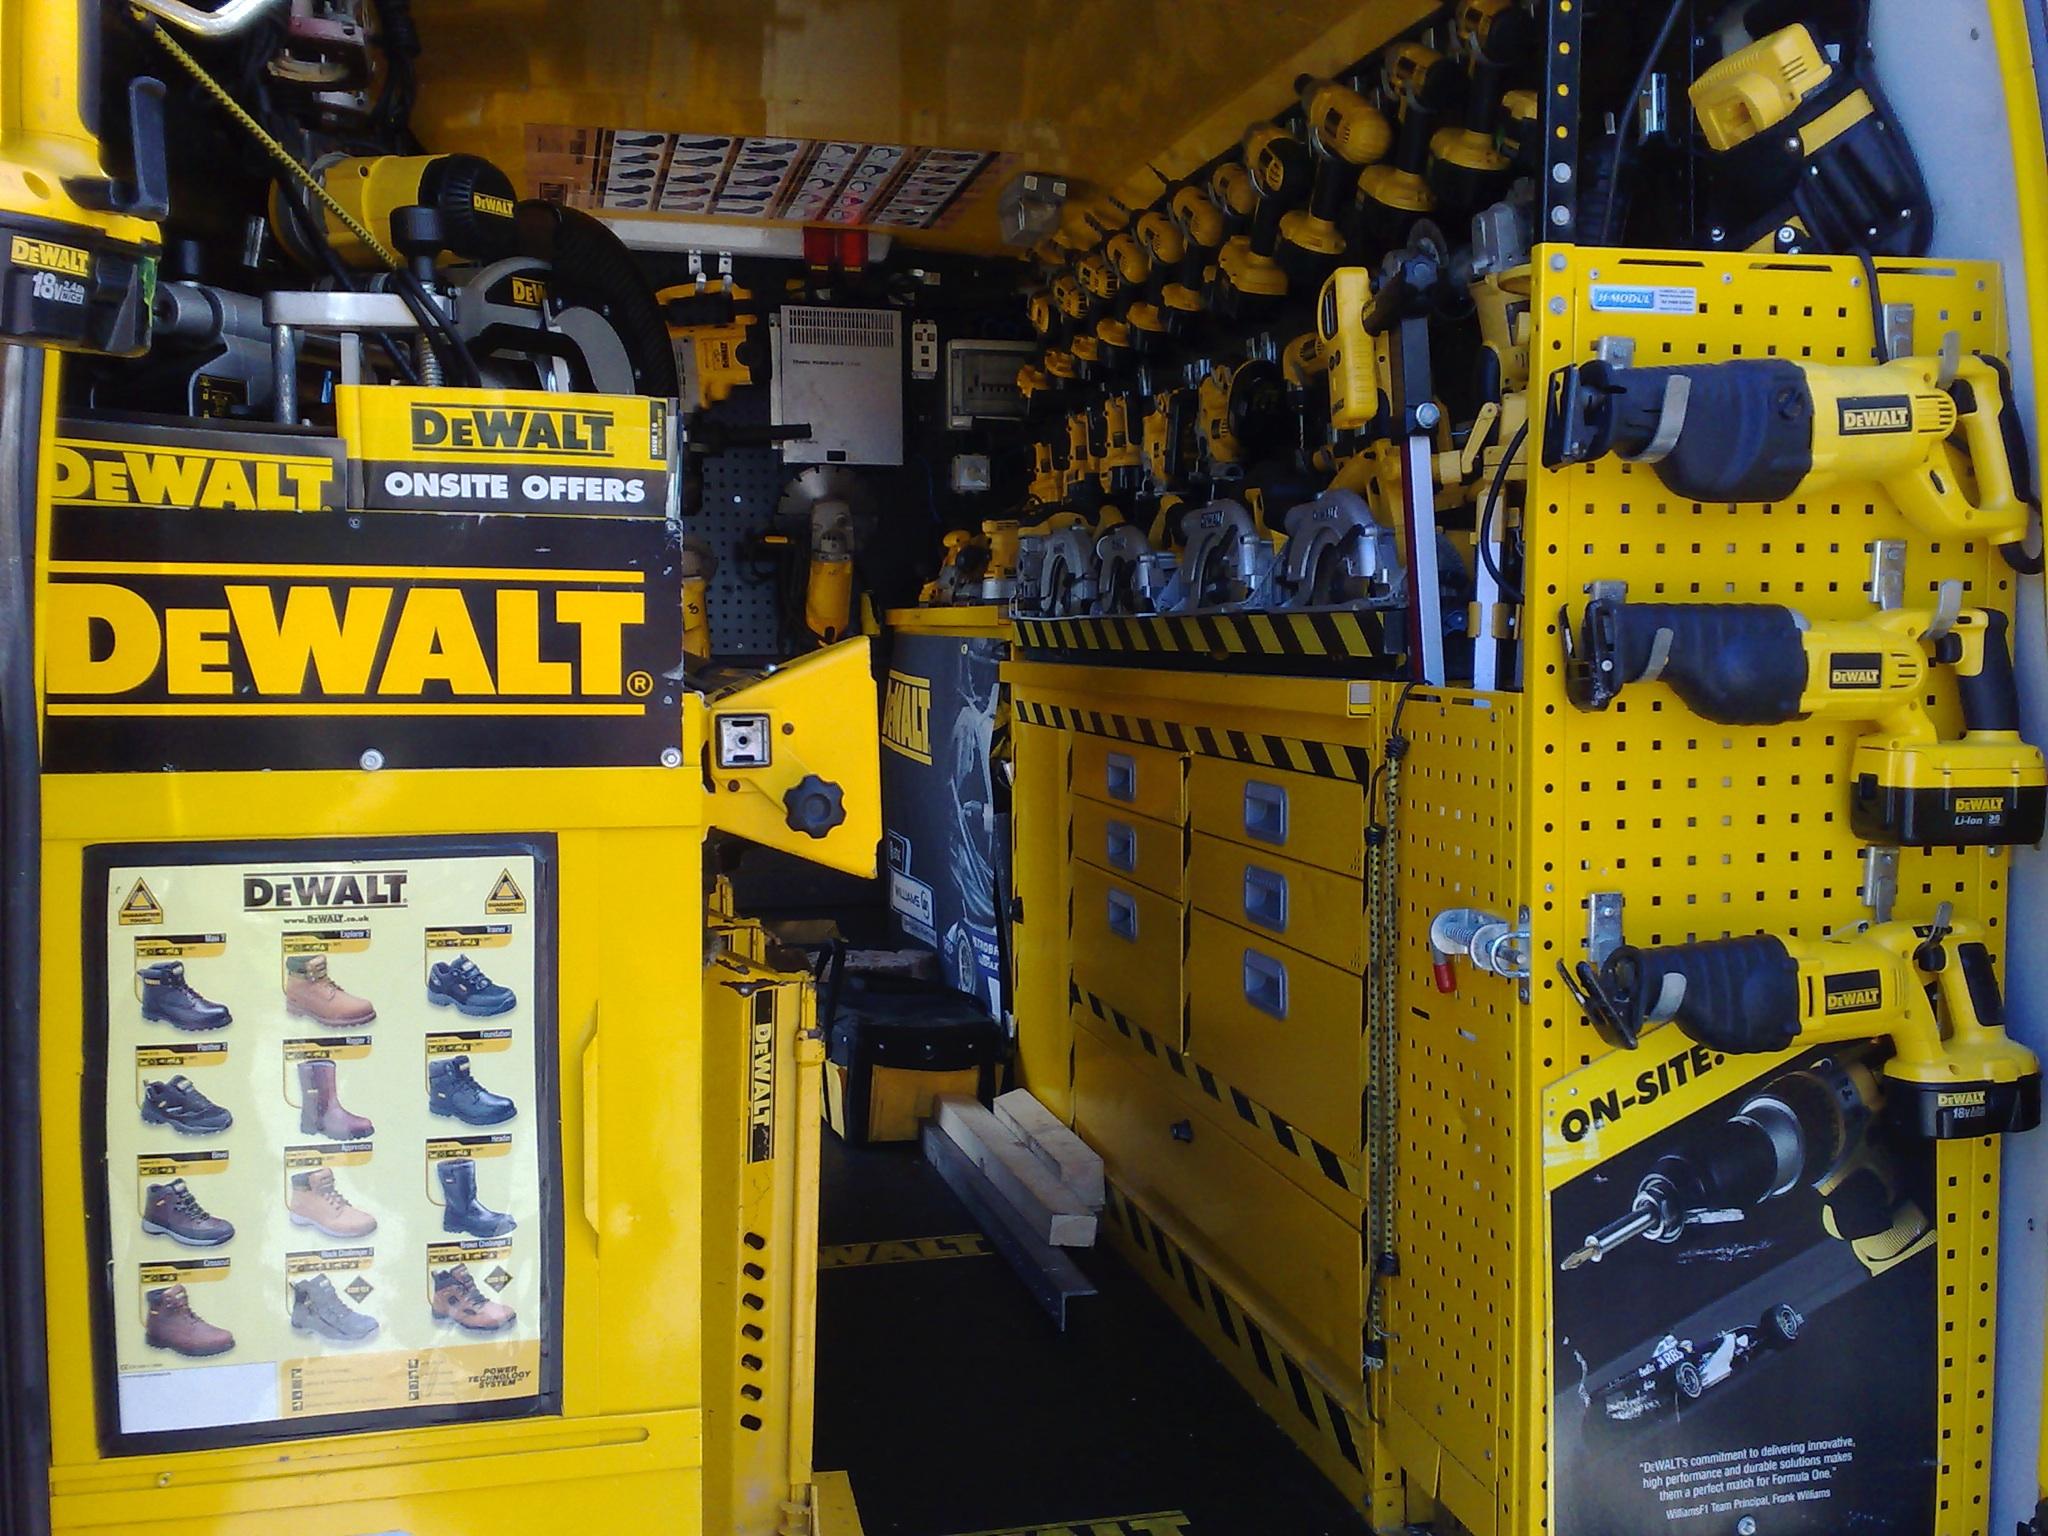 DEWALT UK Twitter: „You're given a empty van, 10 minutes and access the entire DEWALT tool inventory. What do choose? / Twitter